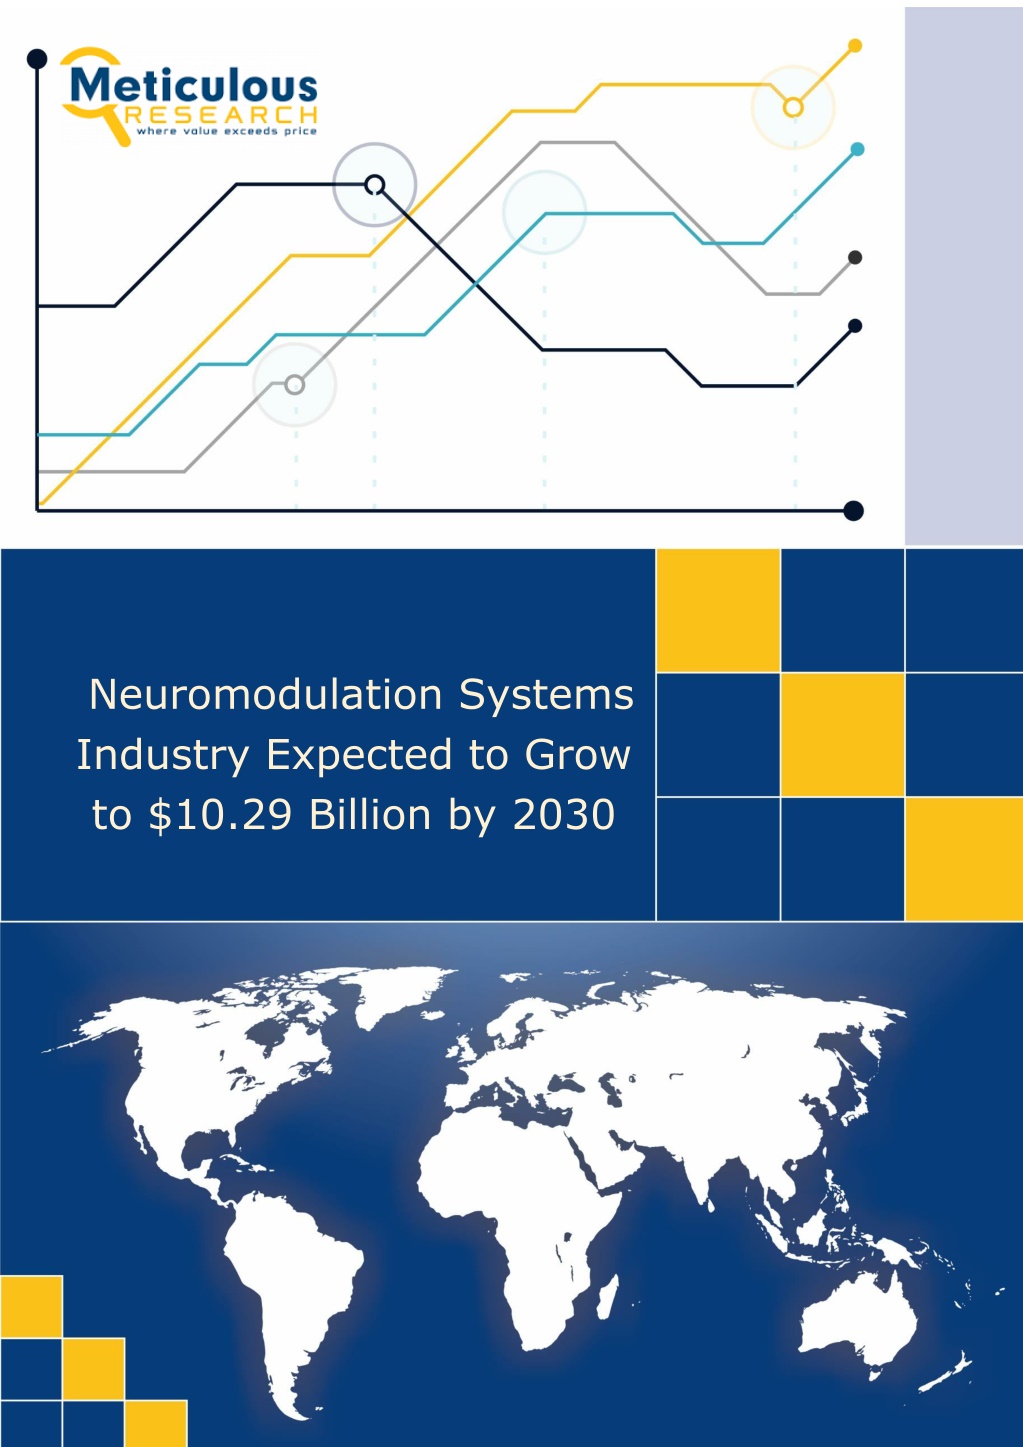 neuromodulation systems industry expected to grow l.w